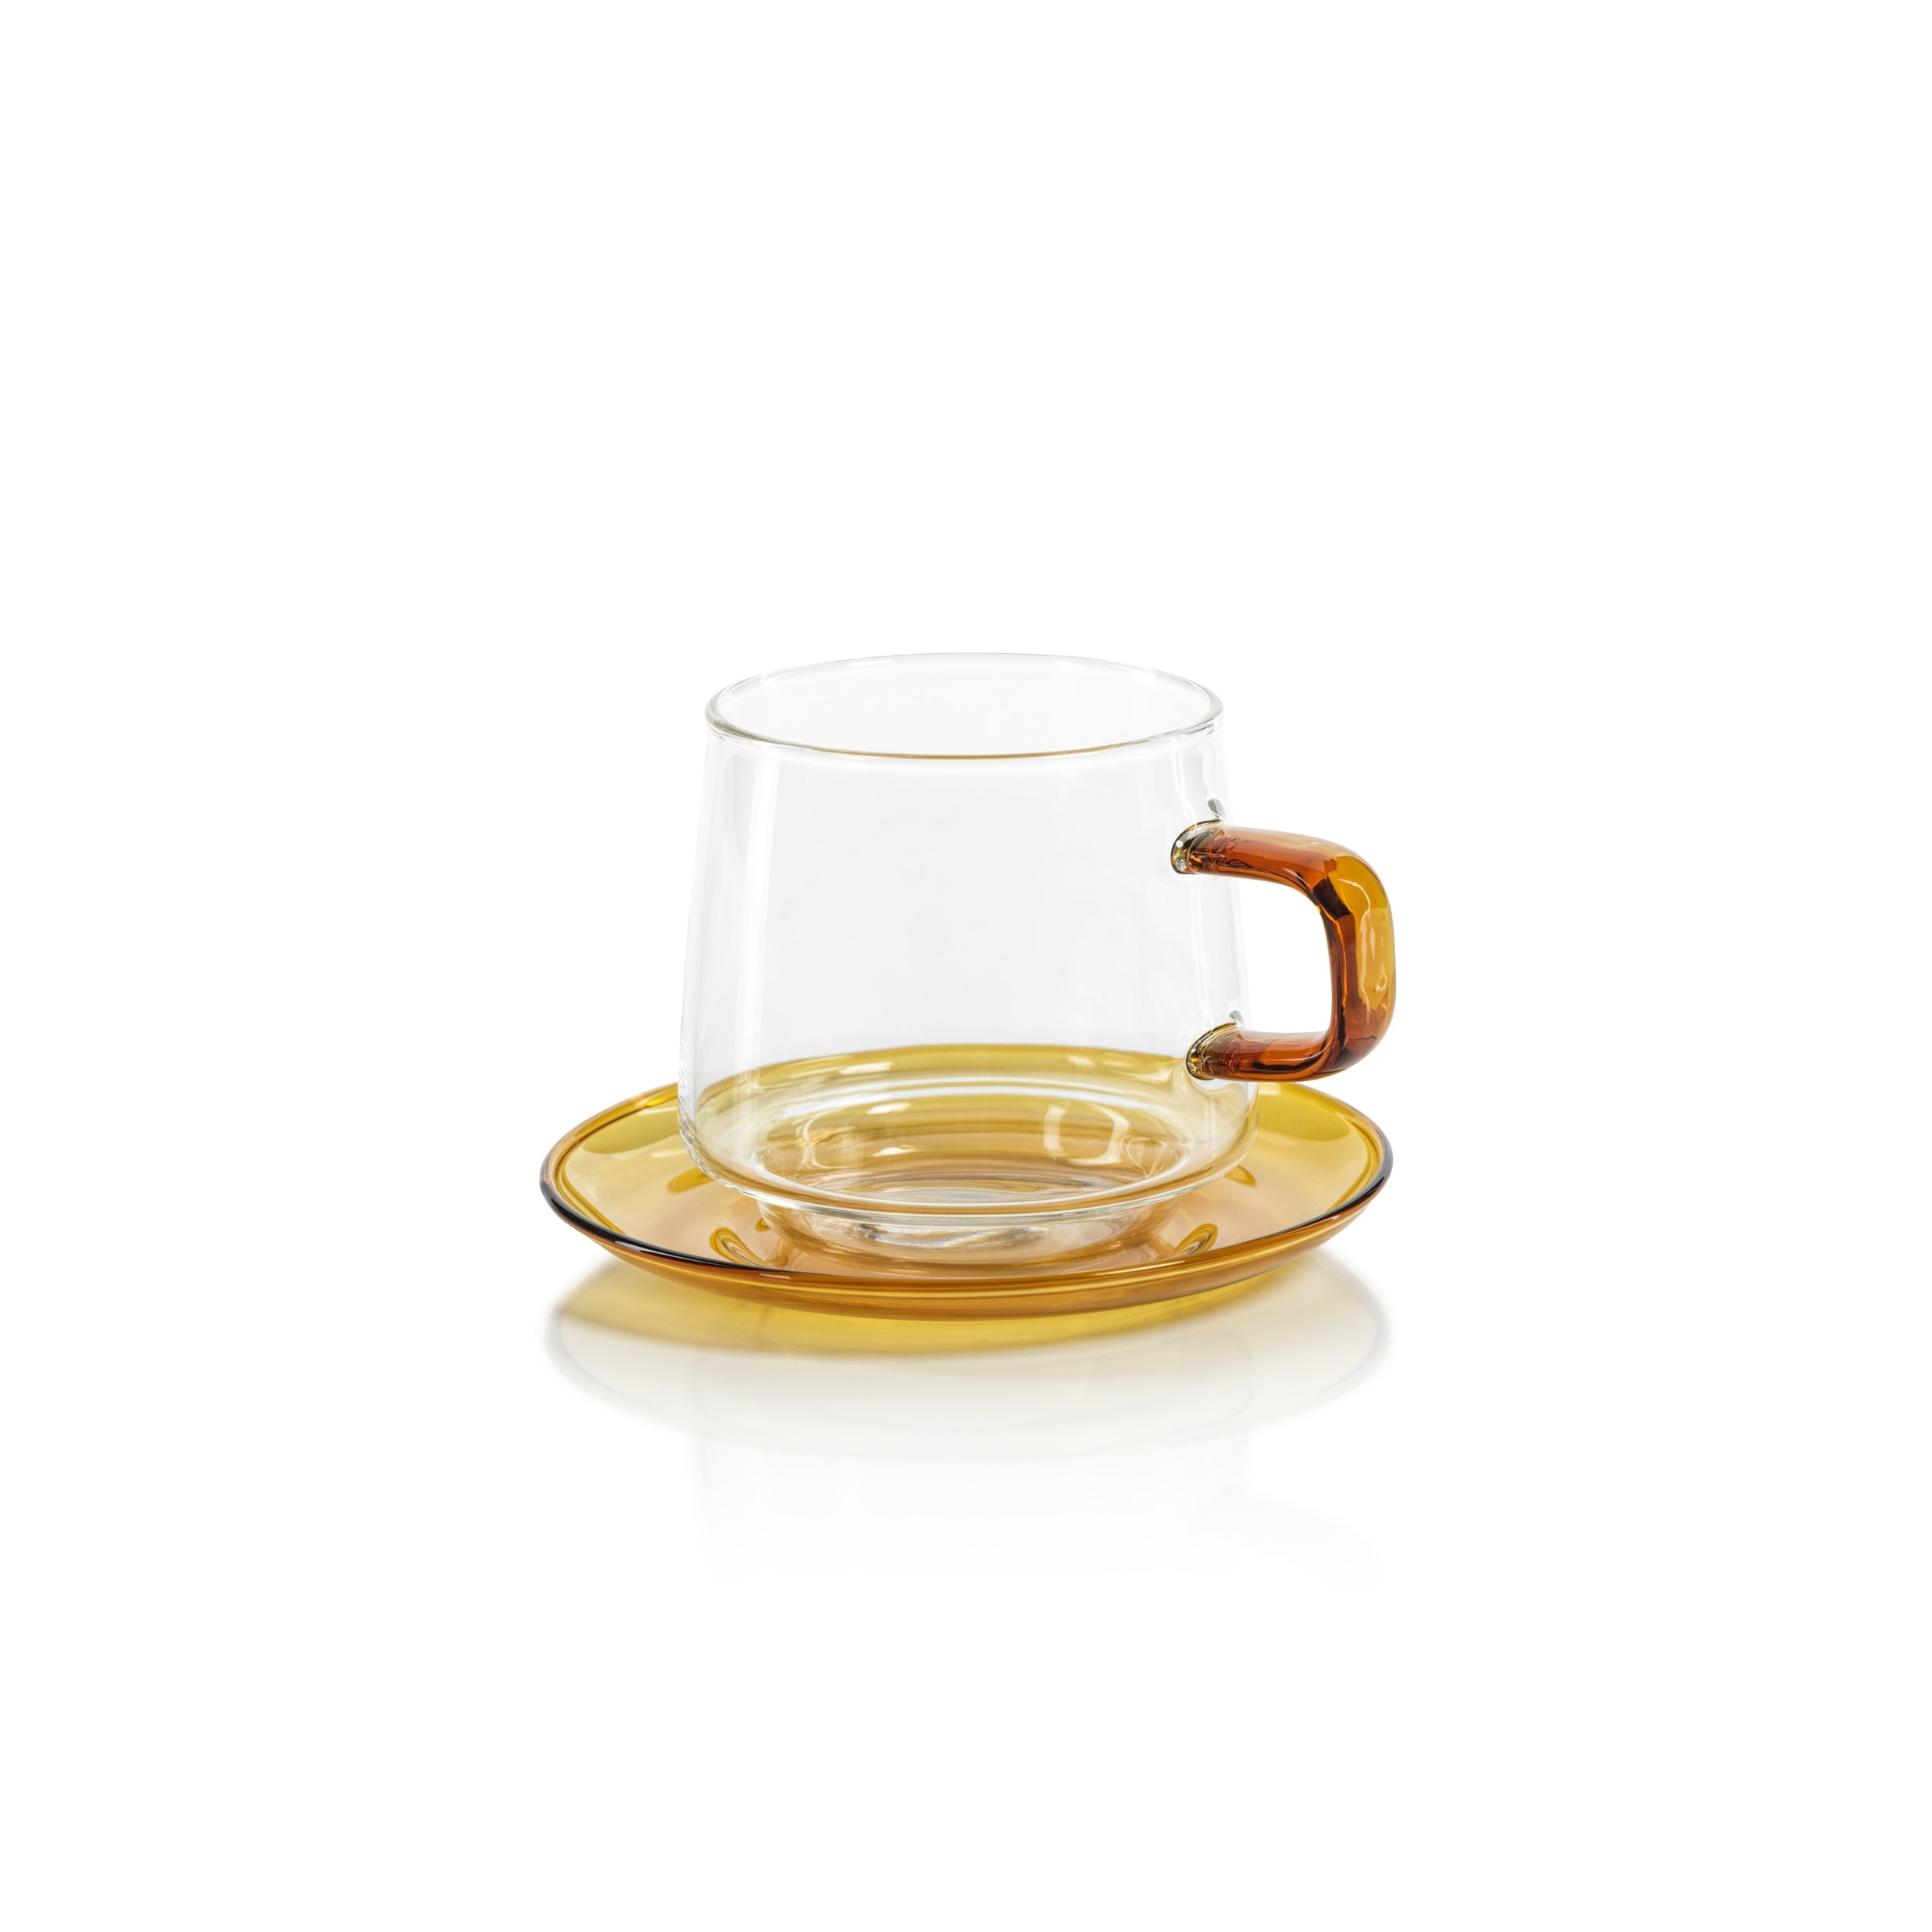 https://ak1.ostkcdn.com/images/products/is/images/direct/59406b648bd69d5aa391819729e3941069ae51db/Bergamo-Glass-Tea-%26-Coffee-Cups-and-Saucers%2C-Set-of-4.jpg